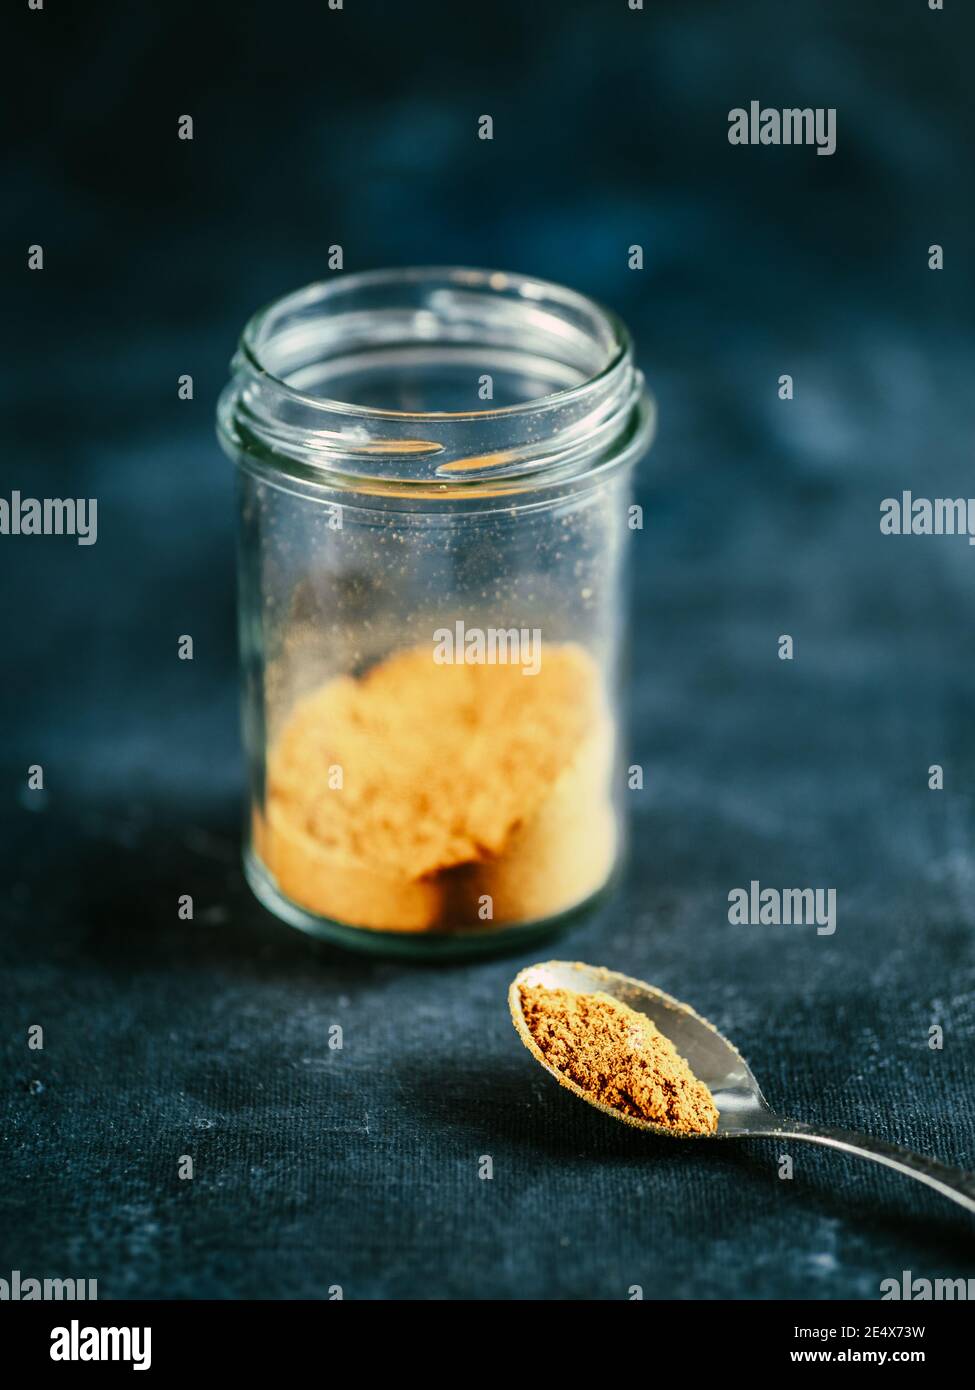 Indian or pakistani masala powder in spoon and glass jar. Homemade dry curry garam masala mix spices blend on dark gray and blue background. Vertical Stock Photo